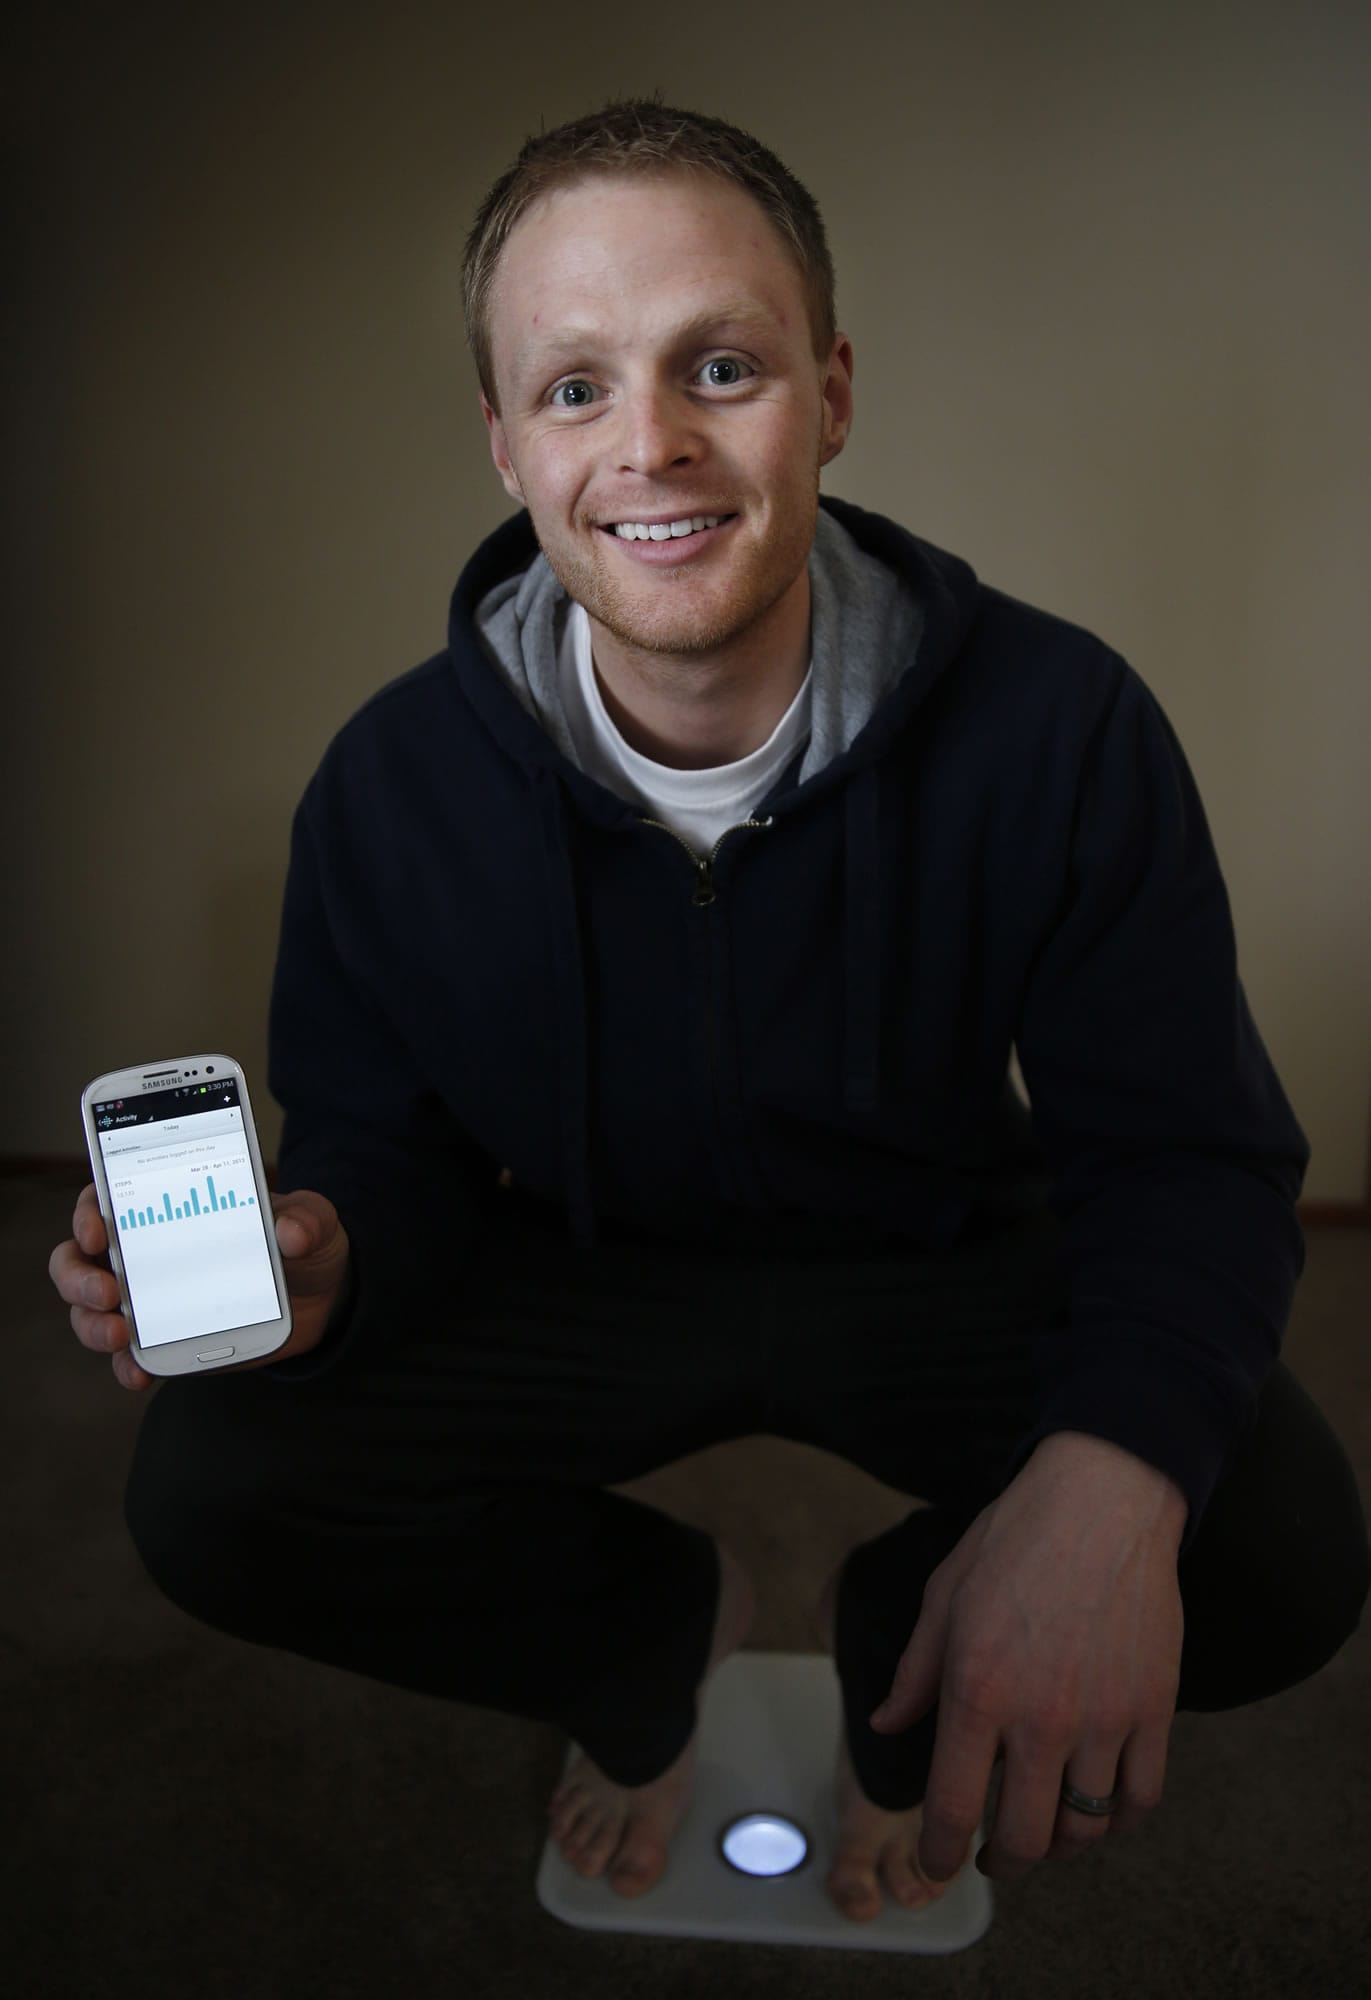 Jared Sieling of Maple Grove, Minn., keeps close track on his health and fitness through electronics.